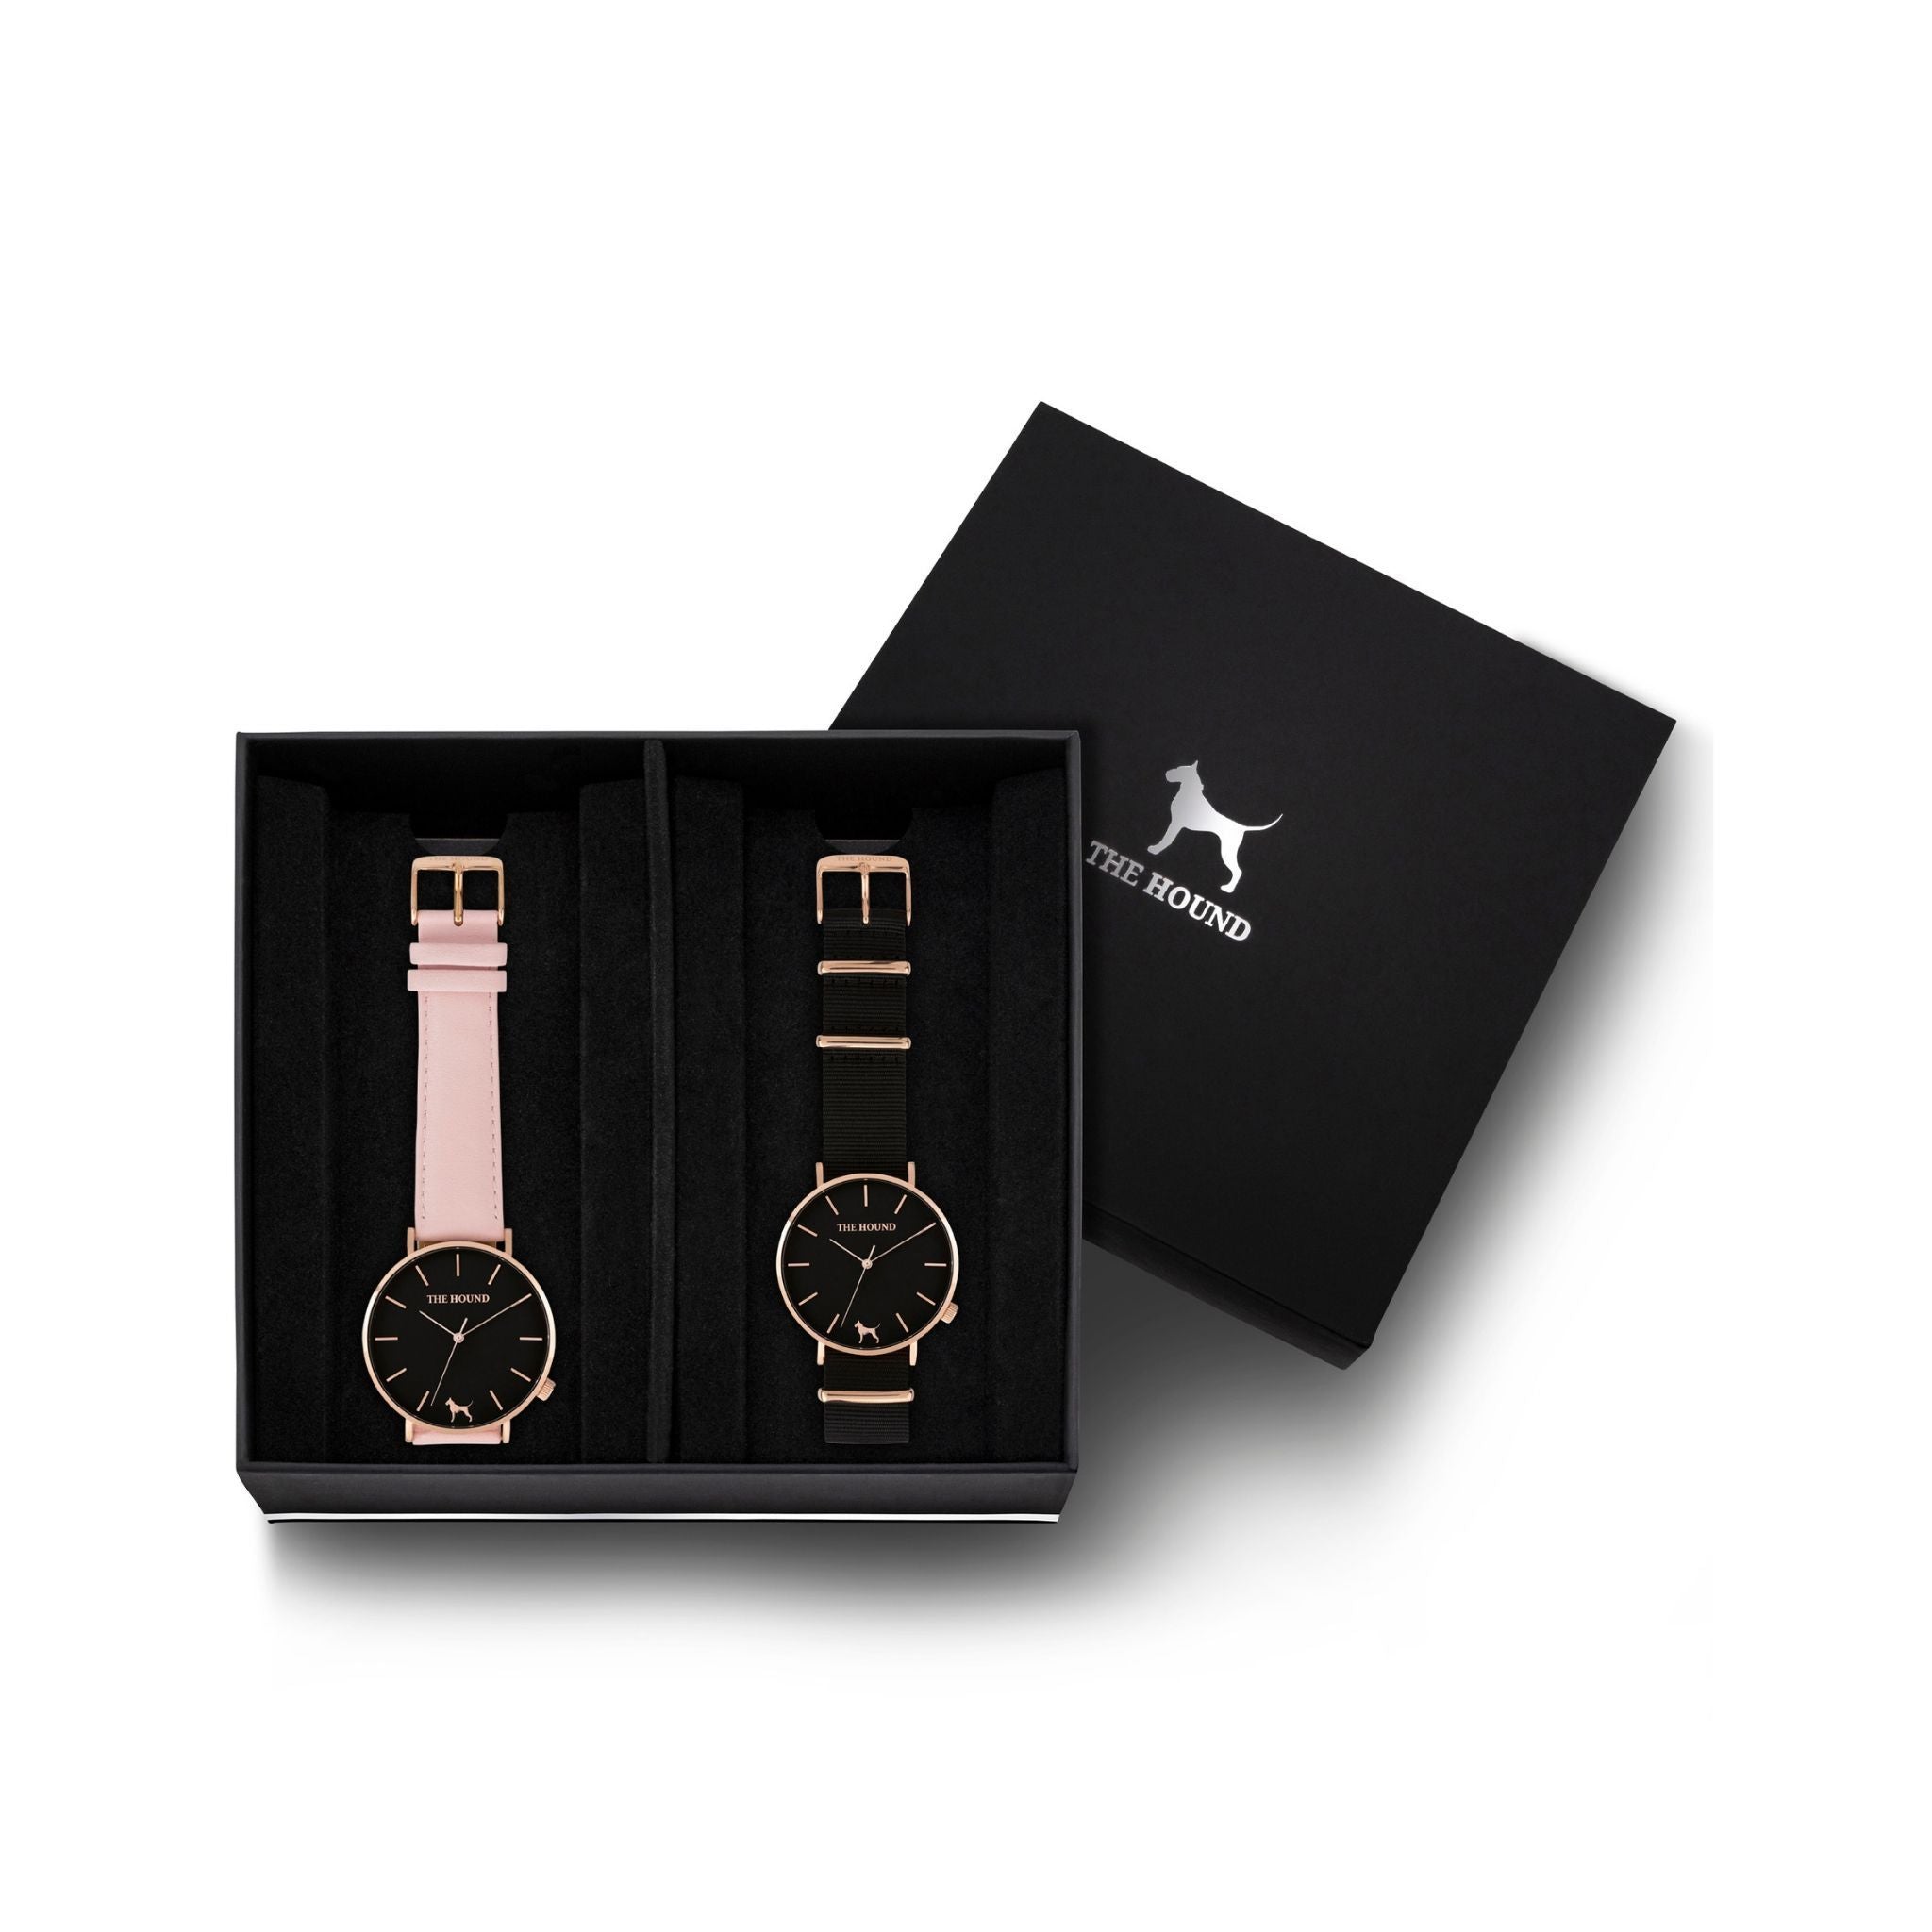 Custom gift set - Rose gold and black watch with stitched blush pink genuine leather band and a rose gold and black watch with black nato leather band